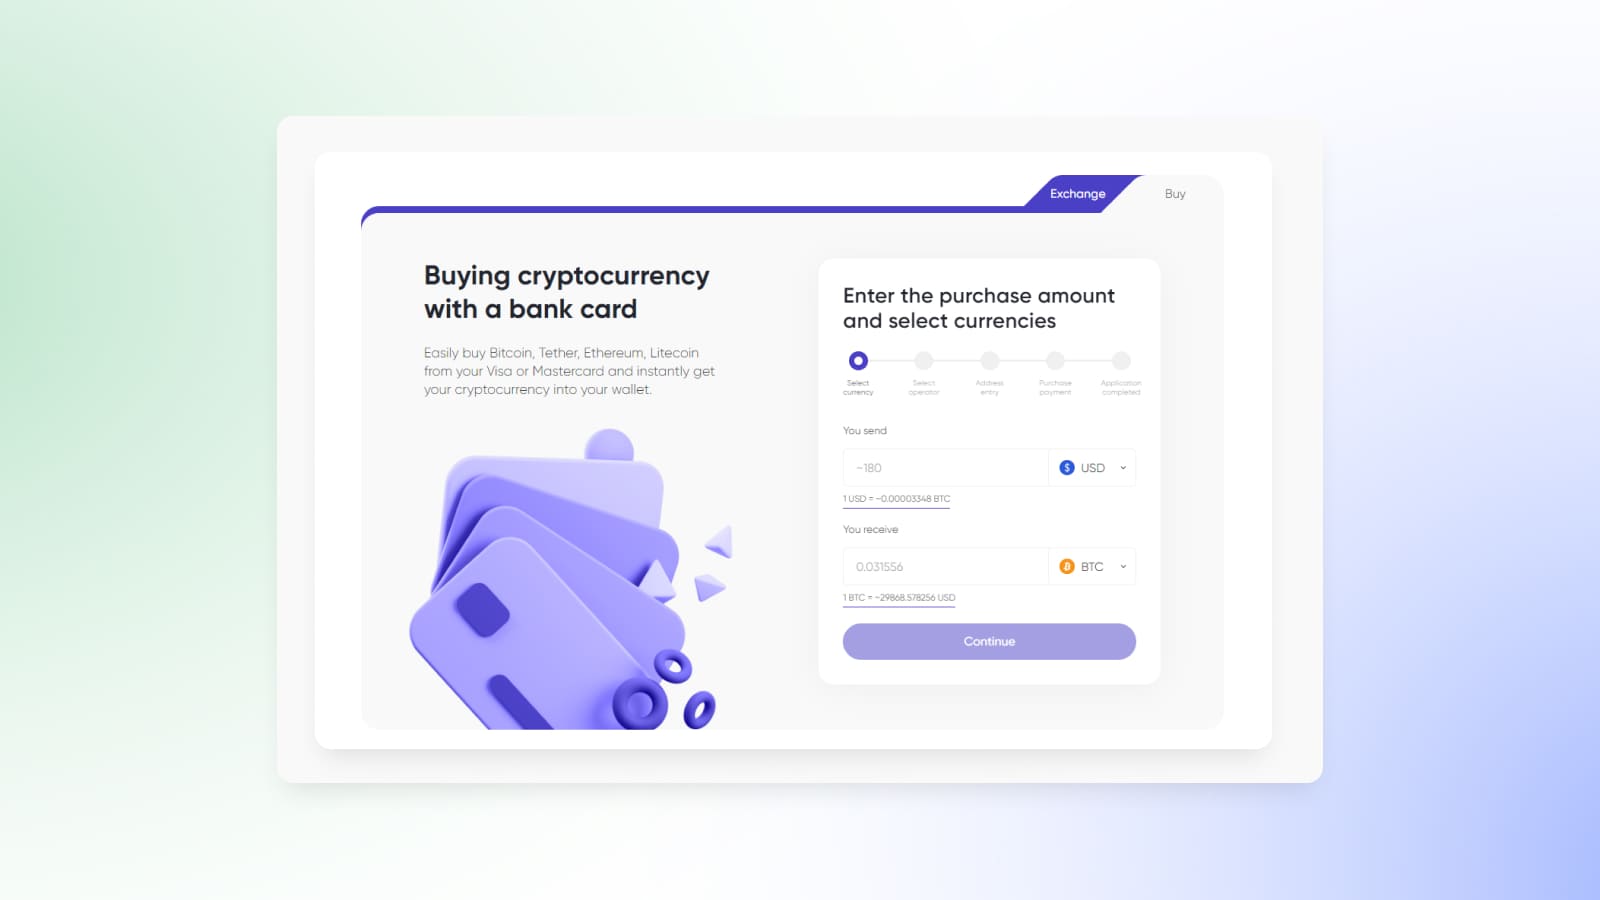 CryptoCloud allows you to buy cryptocurrency from a bank card on the payment page.